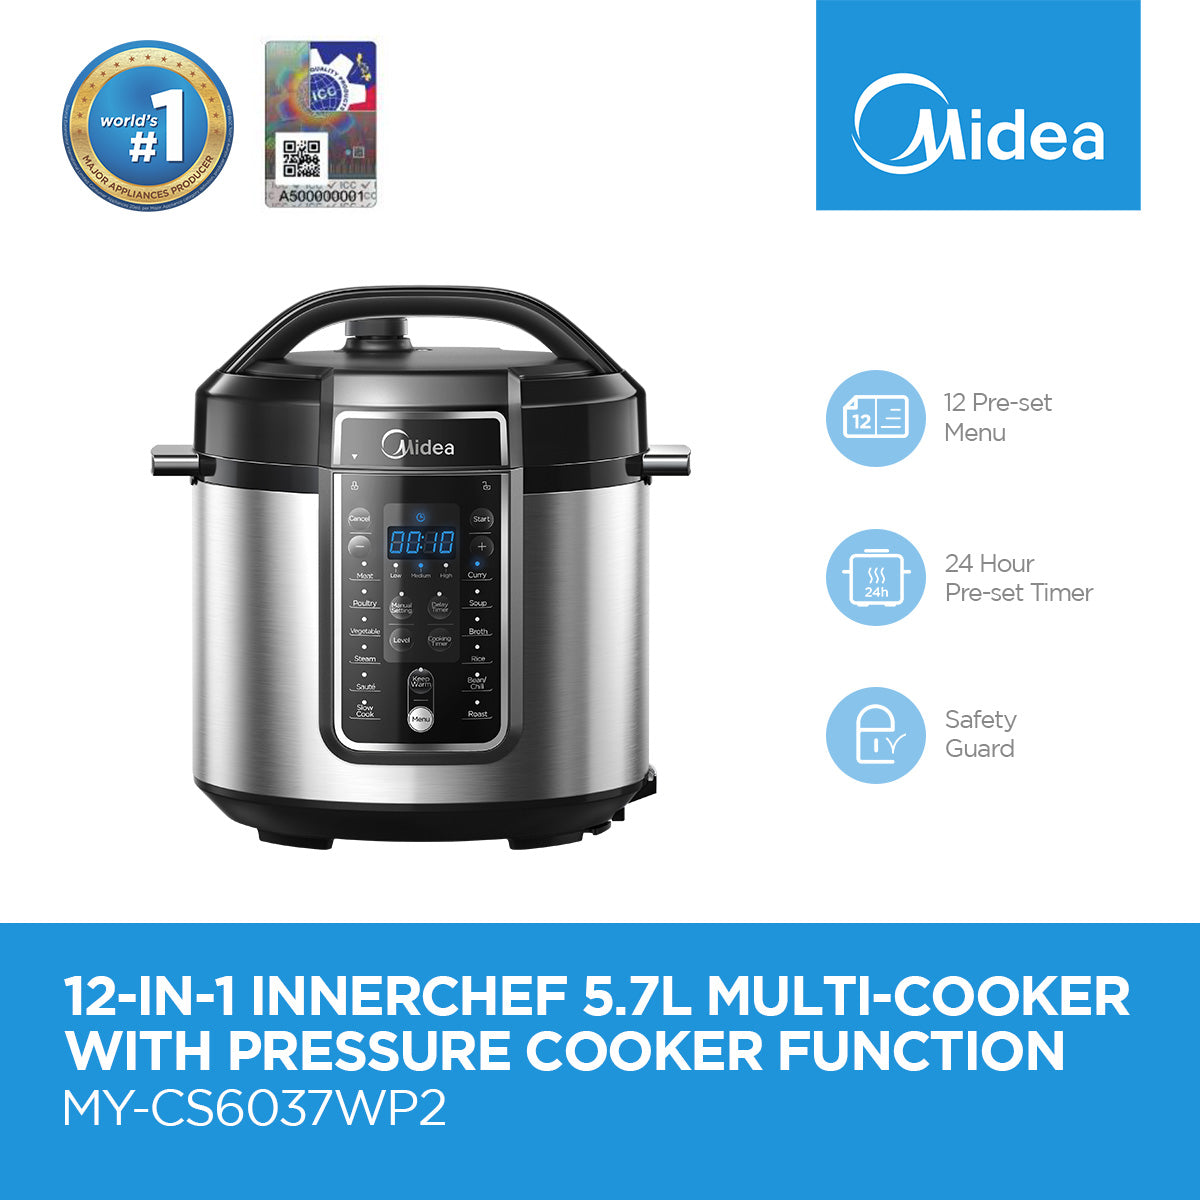 Midea 12-in-1 InnerChef 5.7L Multi-Cooker with Pressure Cooker Function